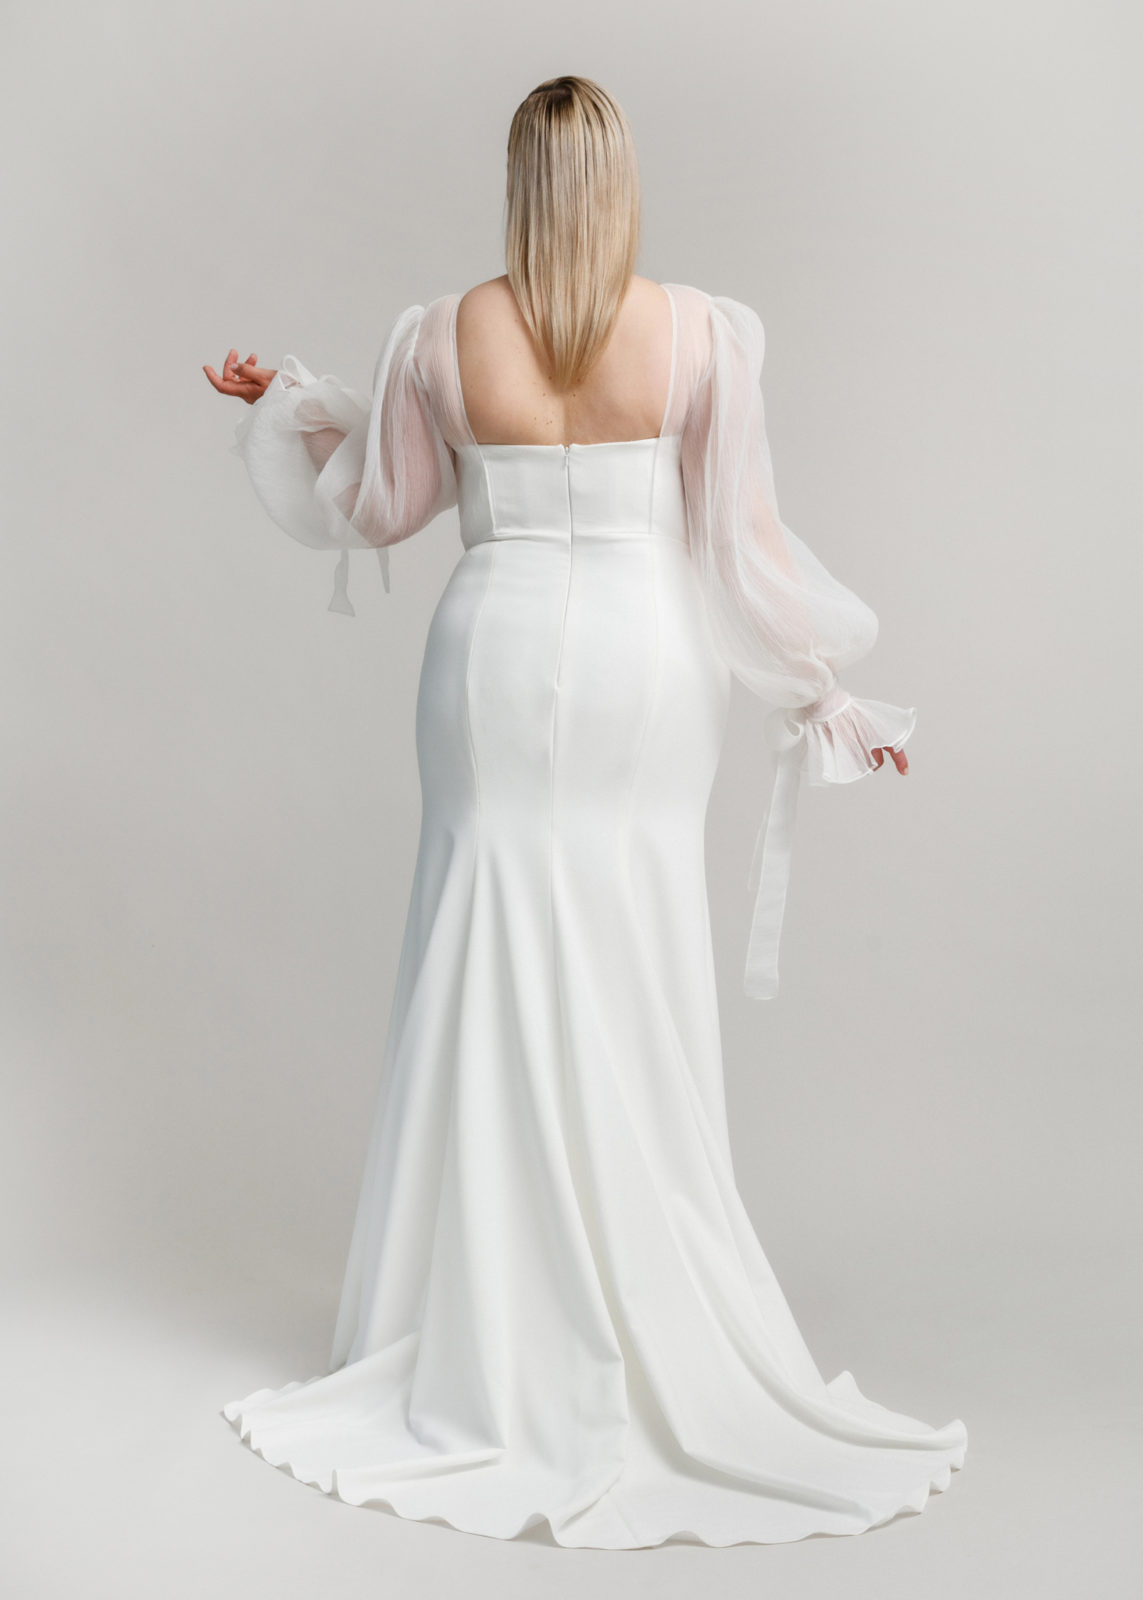 Our Favourite 2022 Wedding Gowns from Laudae, Aesling, and Truvelle Newest Collections Featured by Brontë Bride